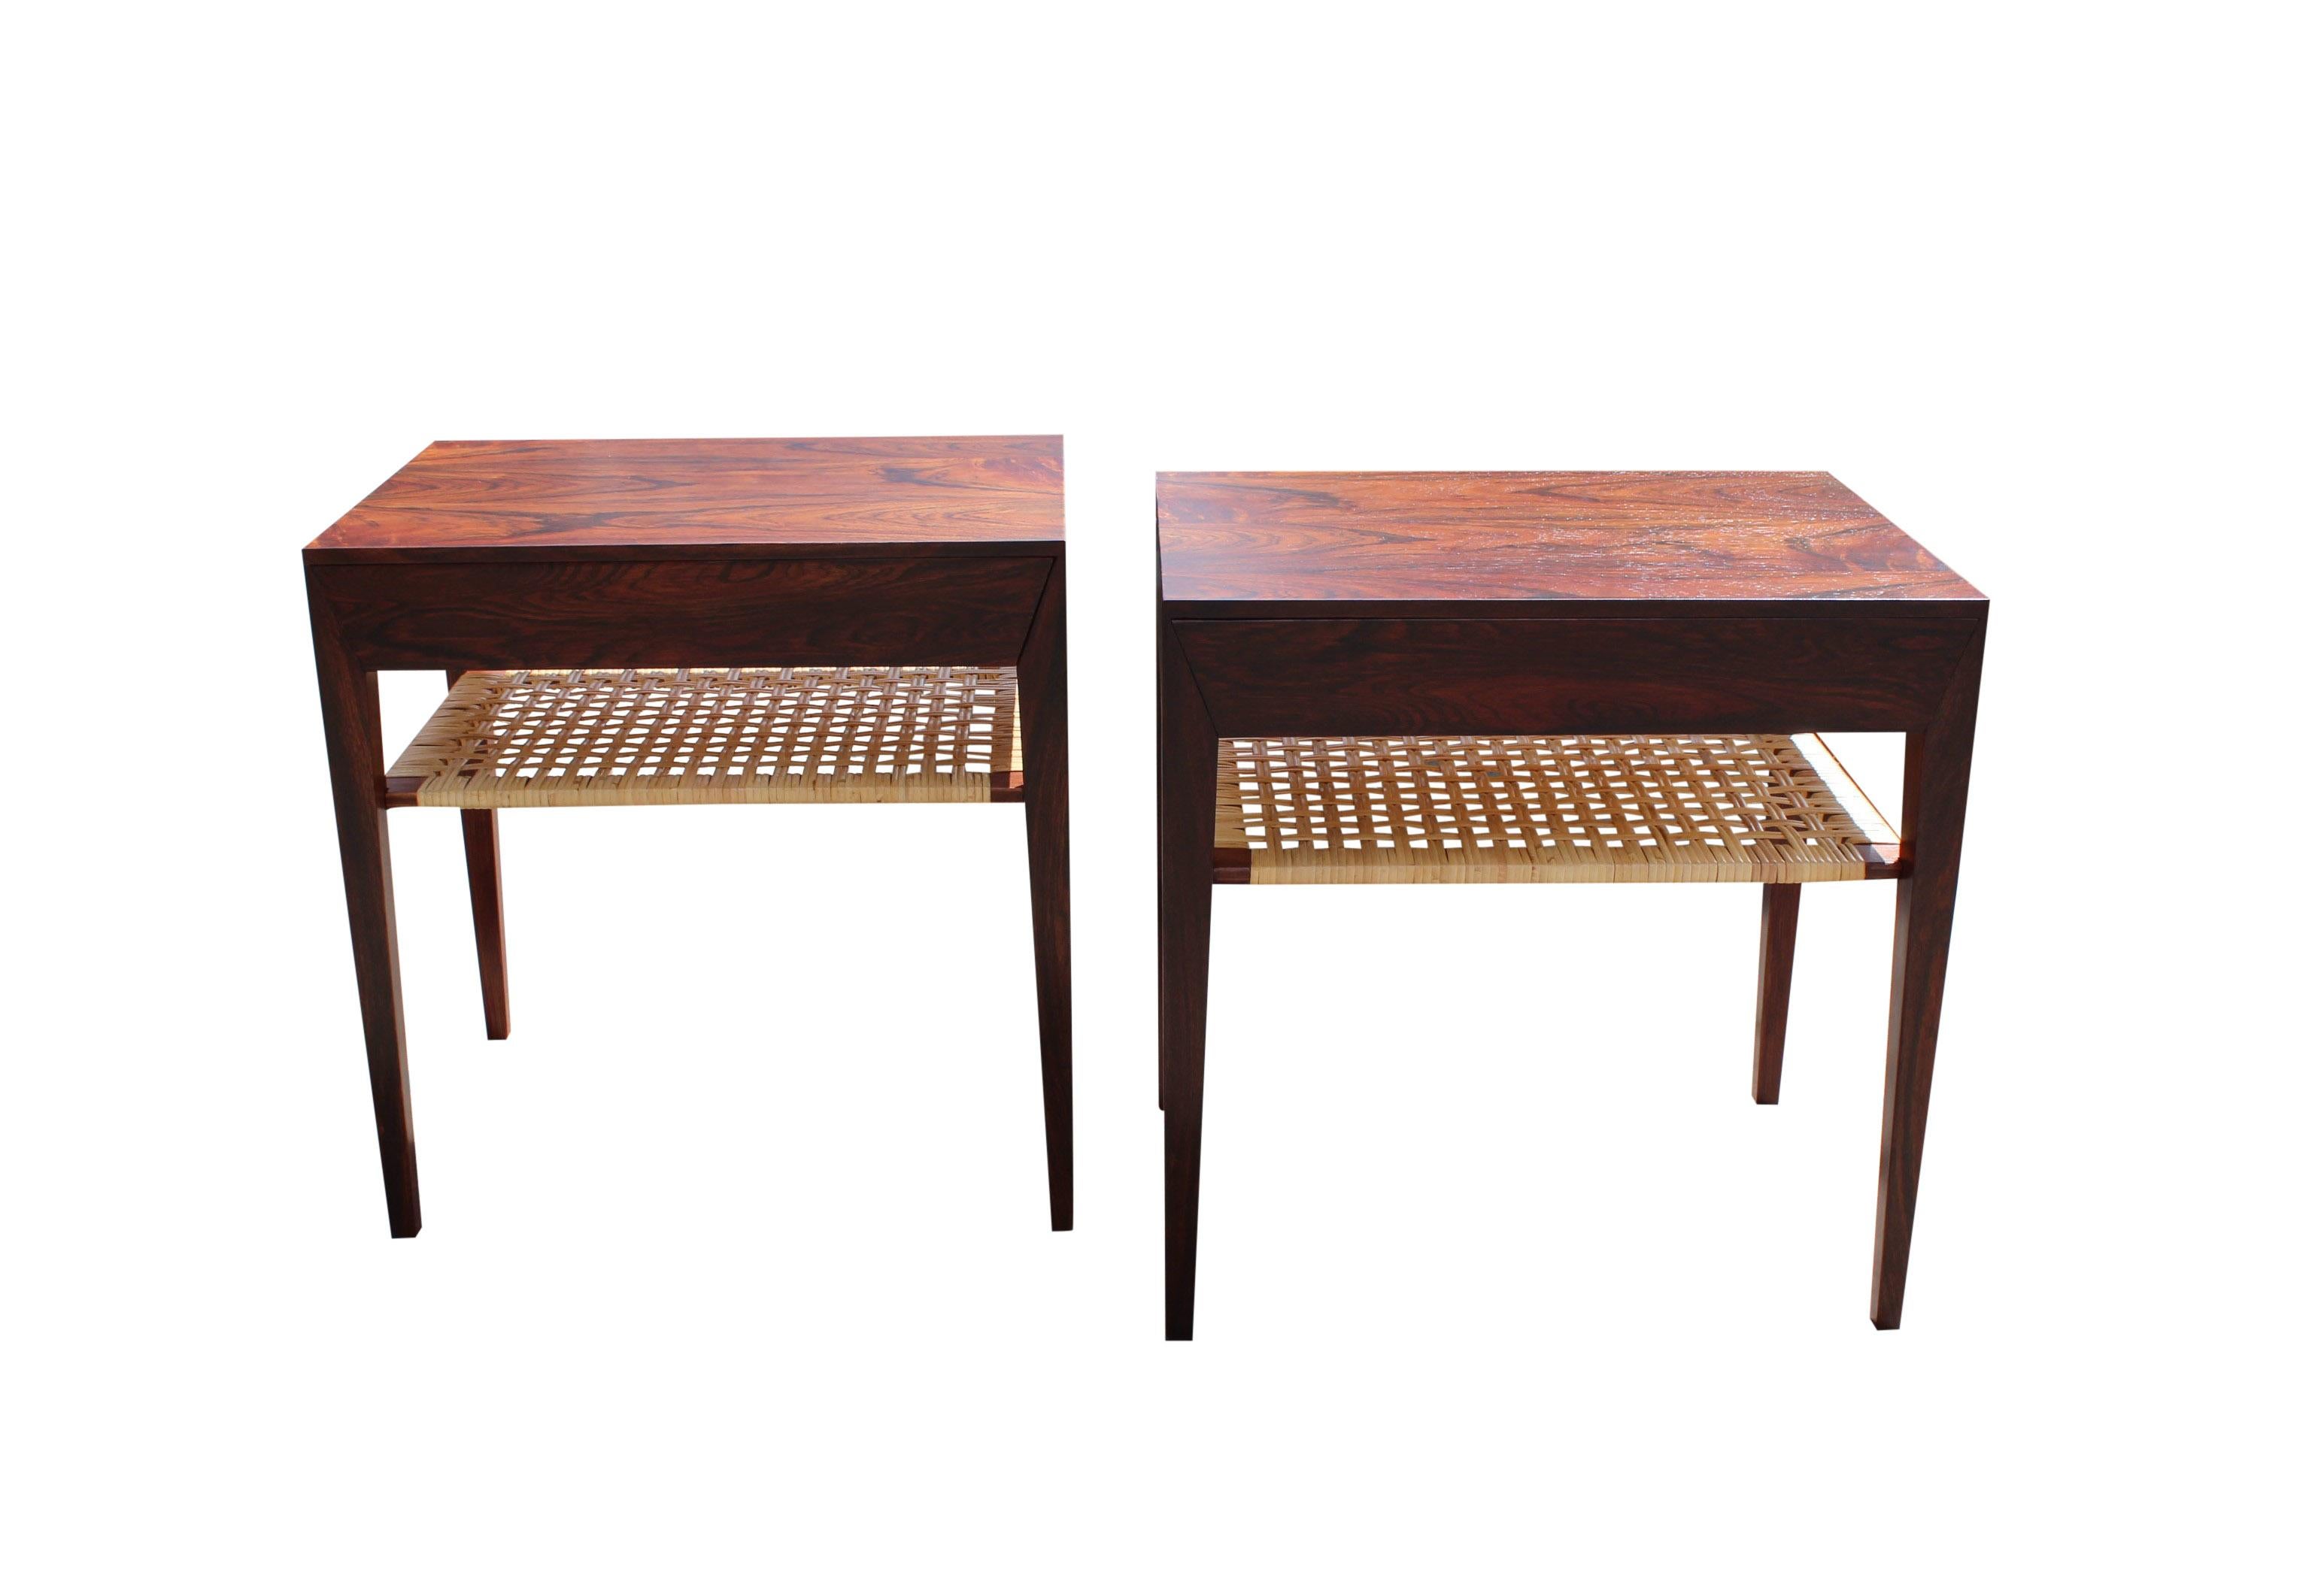 A set of bedside tables in rosewood and papercord shelf designed by Severin Hansen and manufactured by Haslev furniture factory in the 1960s. The tables are in great vintage condition.
Measures: H 50 cm, W 50 cm and D 35 cm.
 